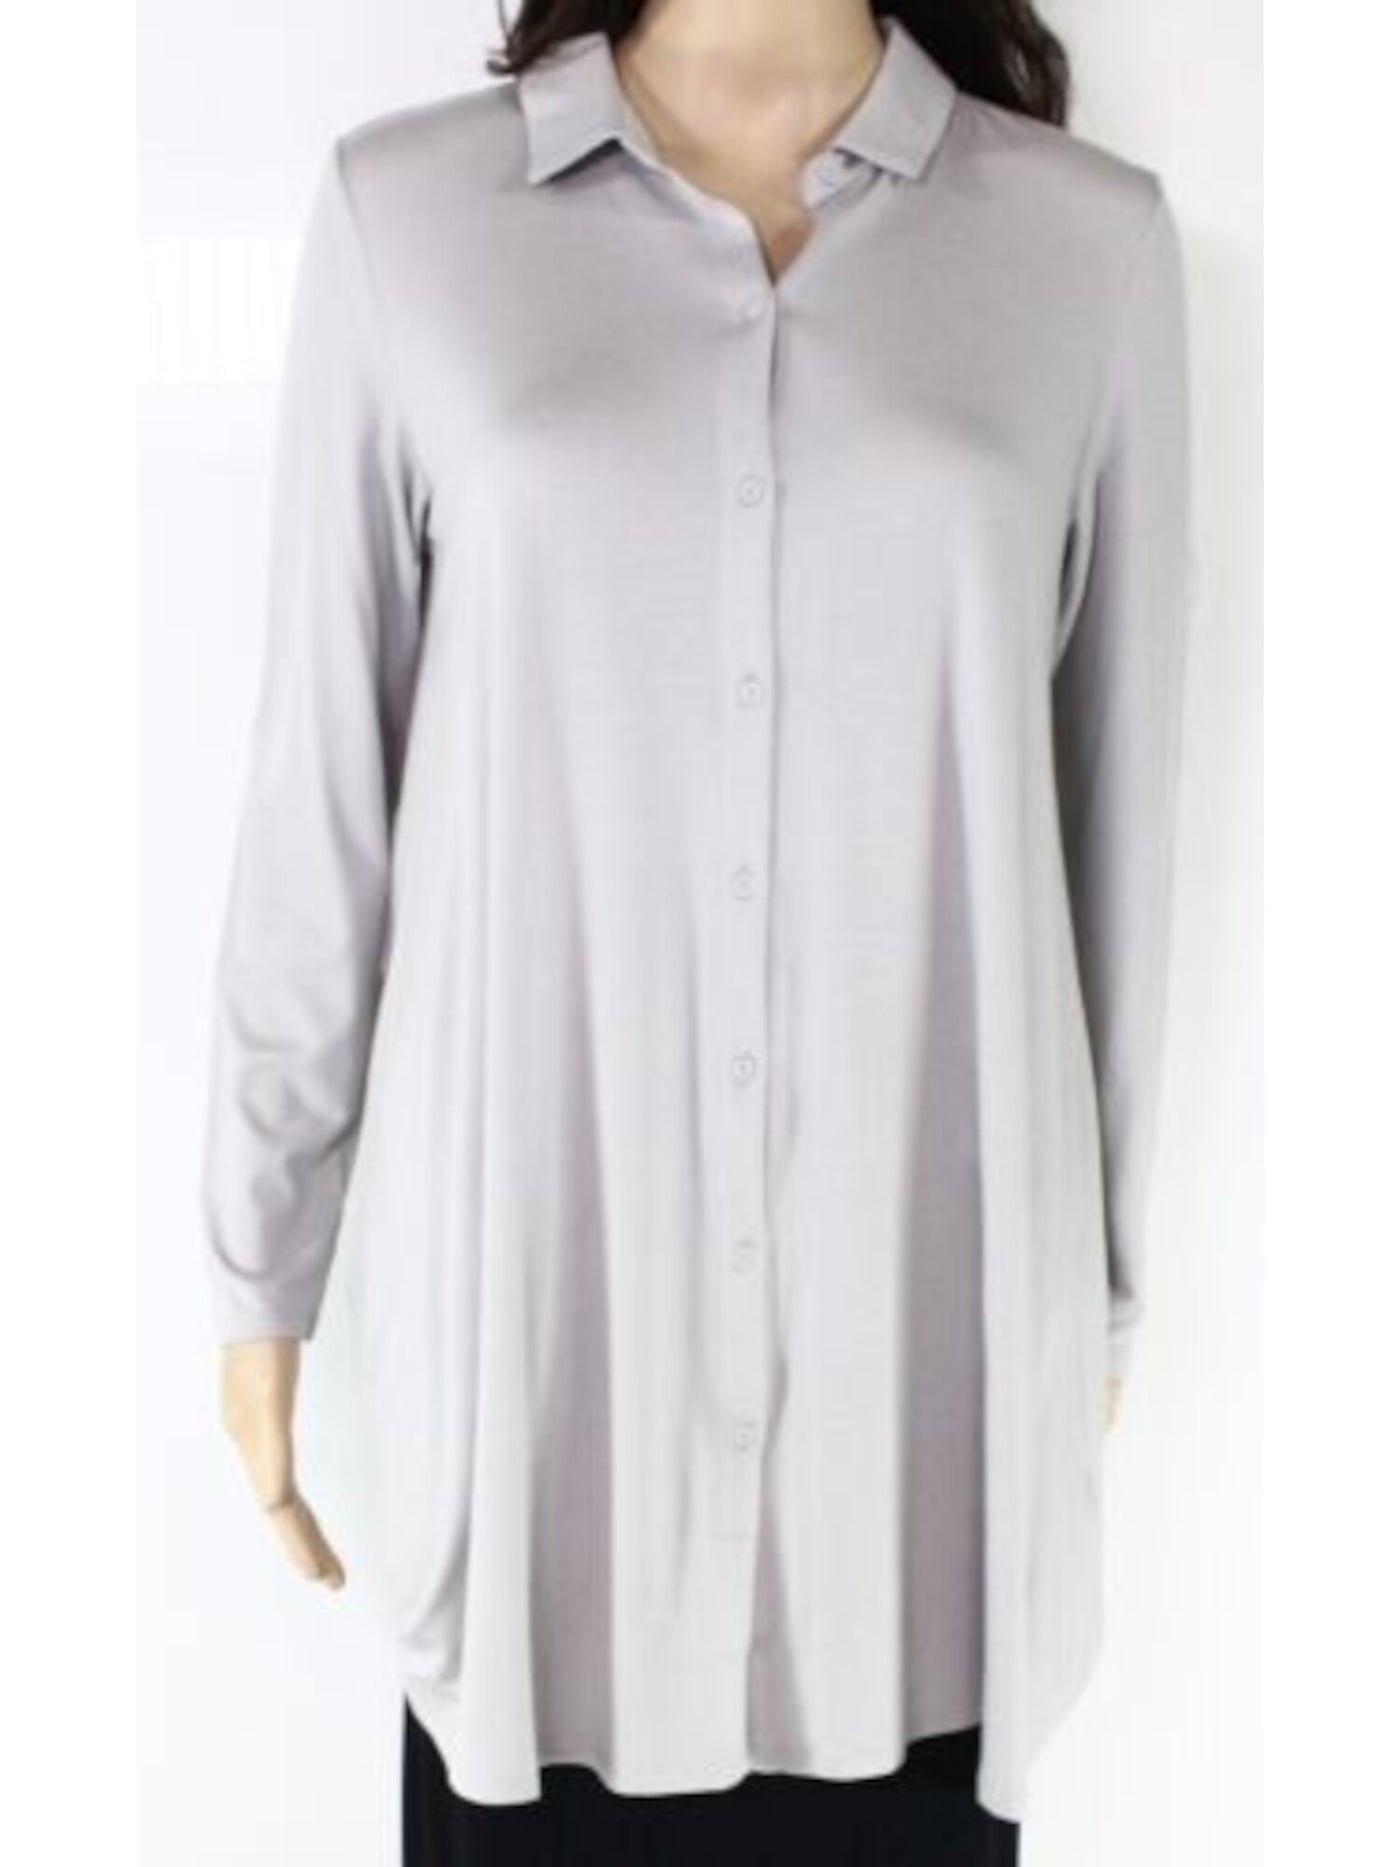 EILEEN FISHER Womens Gray Stretch Long Sleeve Collared Wear To Work Tunic Top L